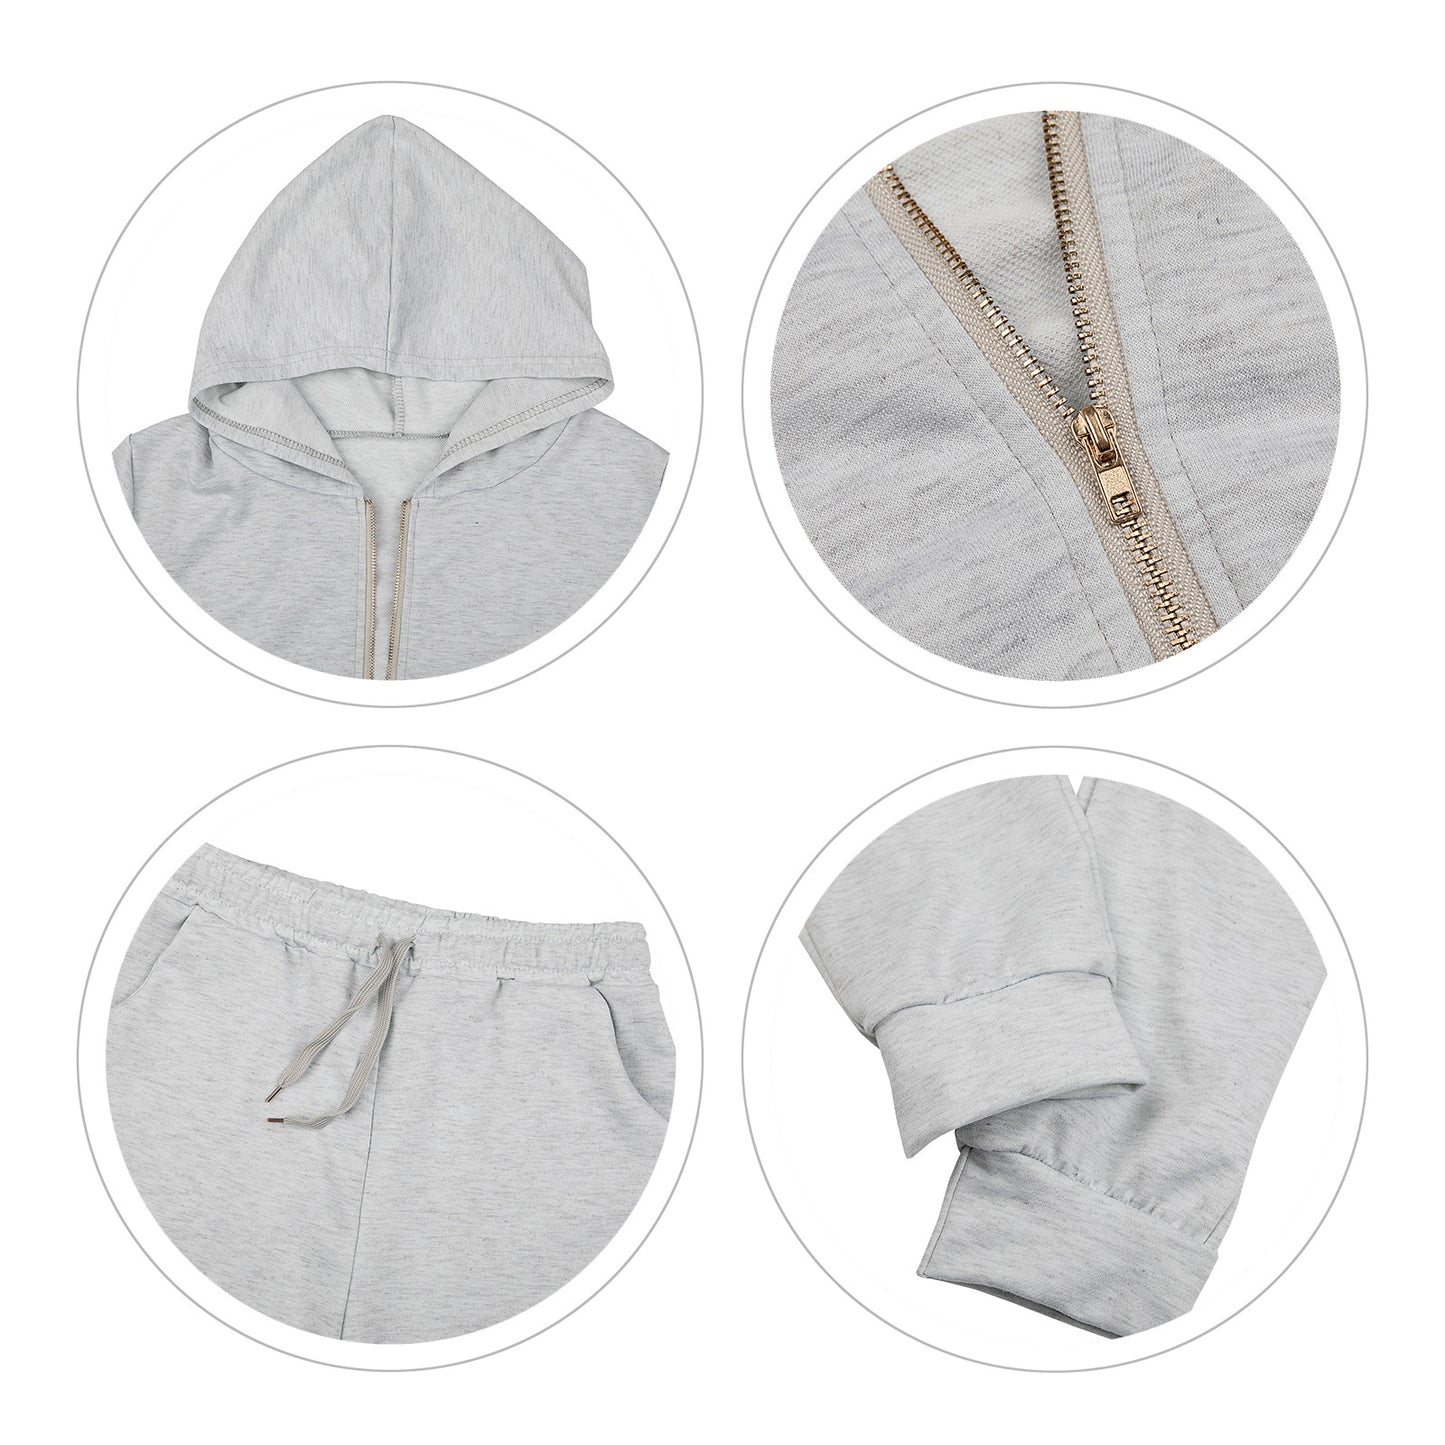 Pure Color Leisure Hooded Women's Three-piece Set